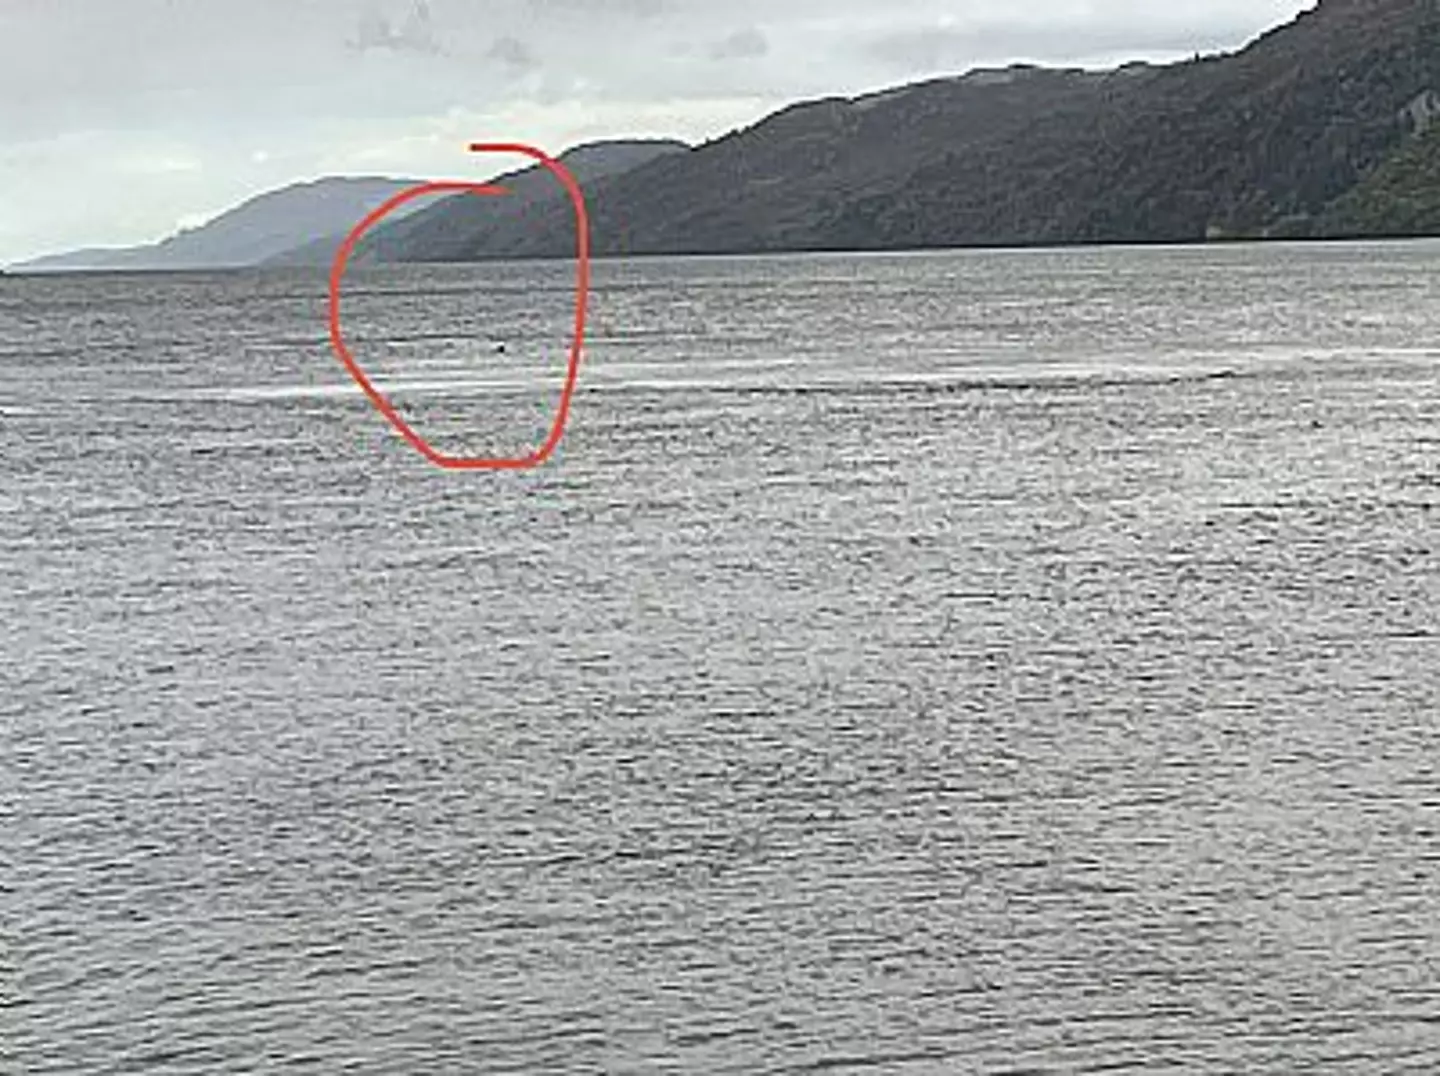 A further mysterious black lump spotted at the Loch Ness in the Scottish Highlands has been recorded.